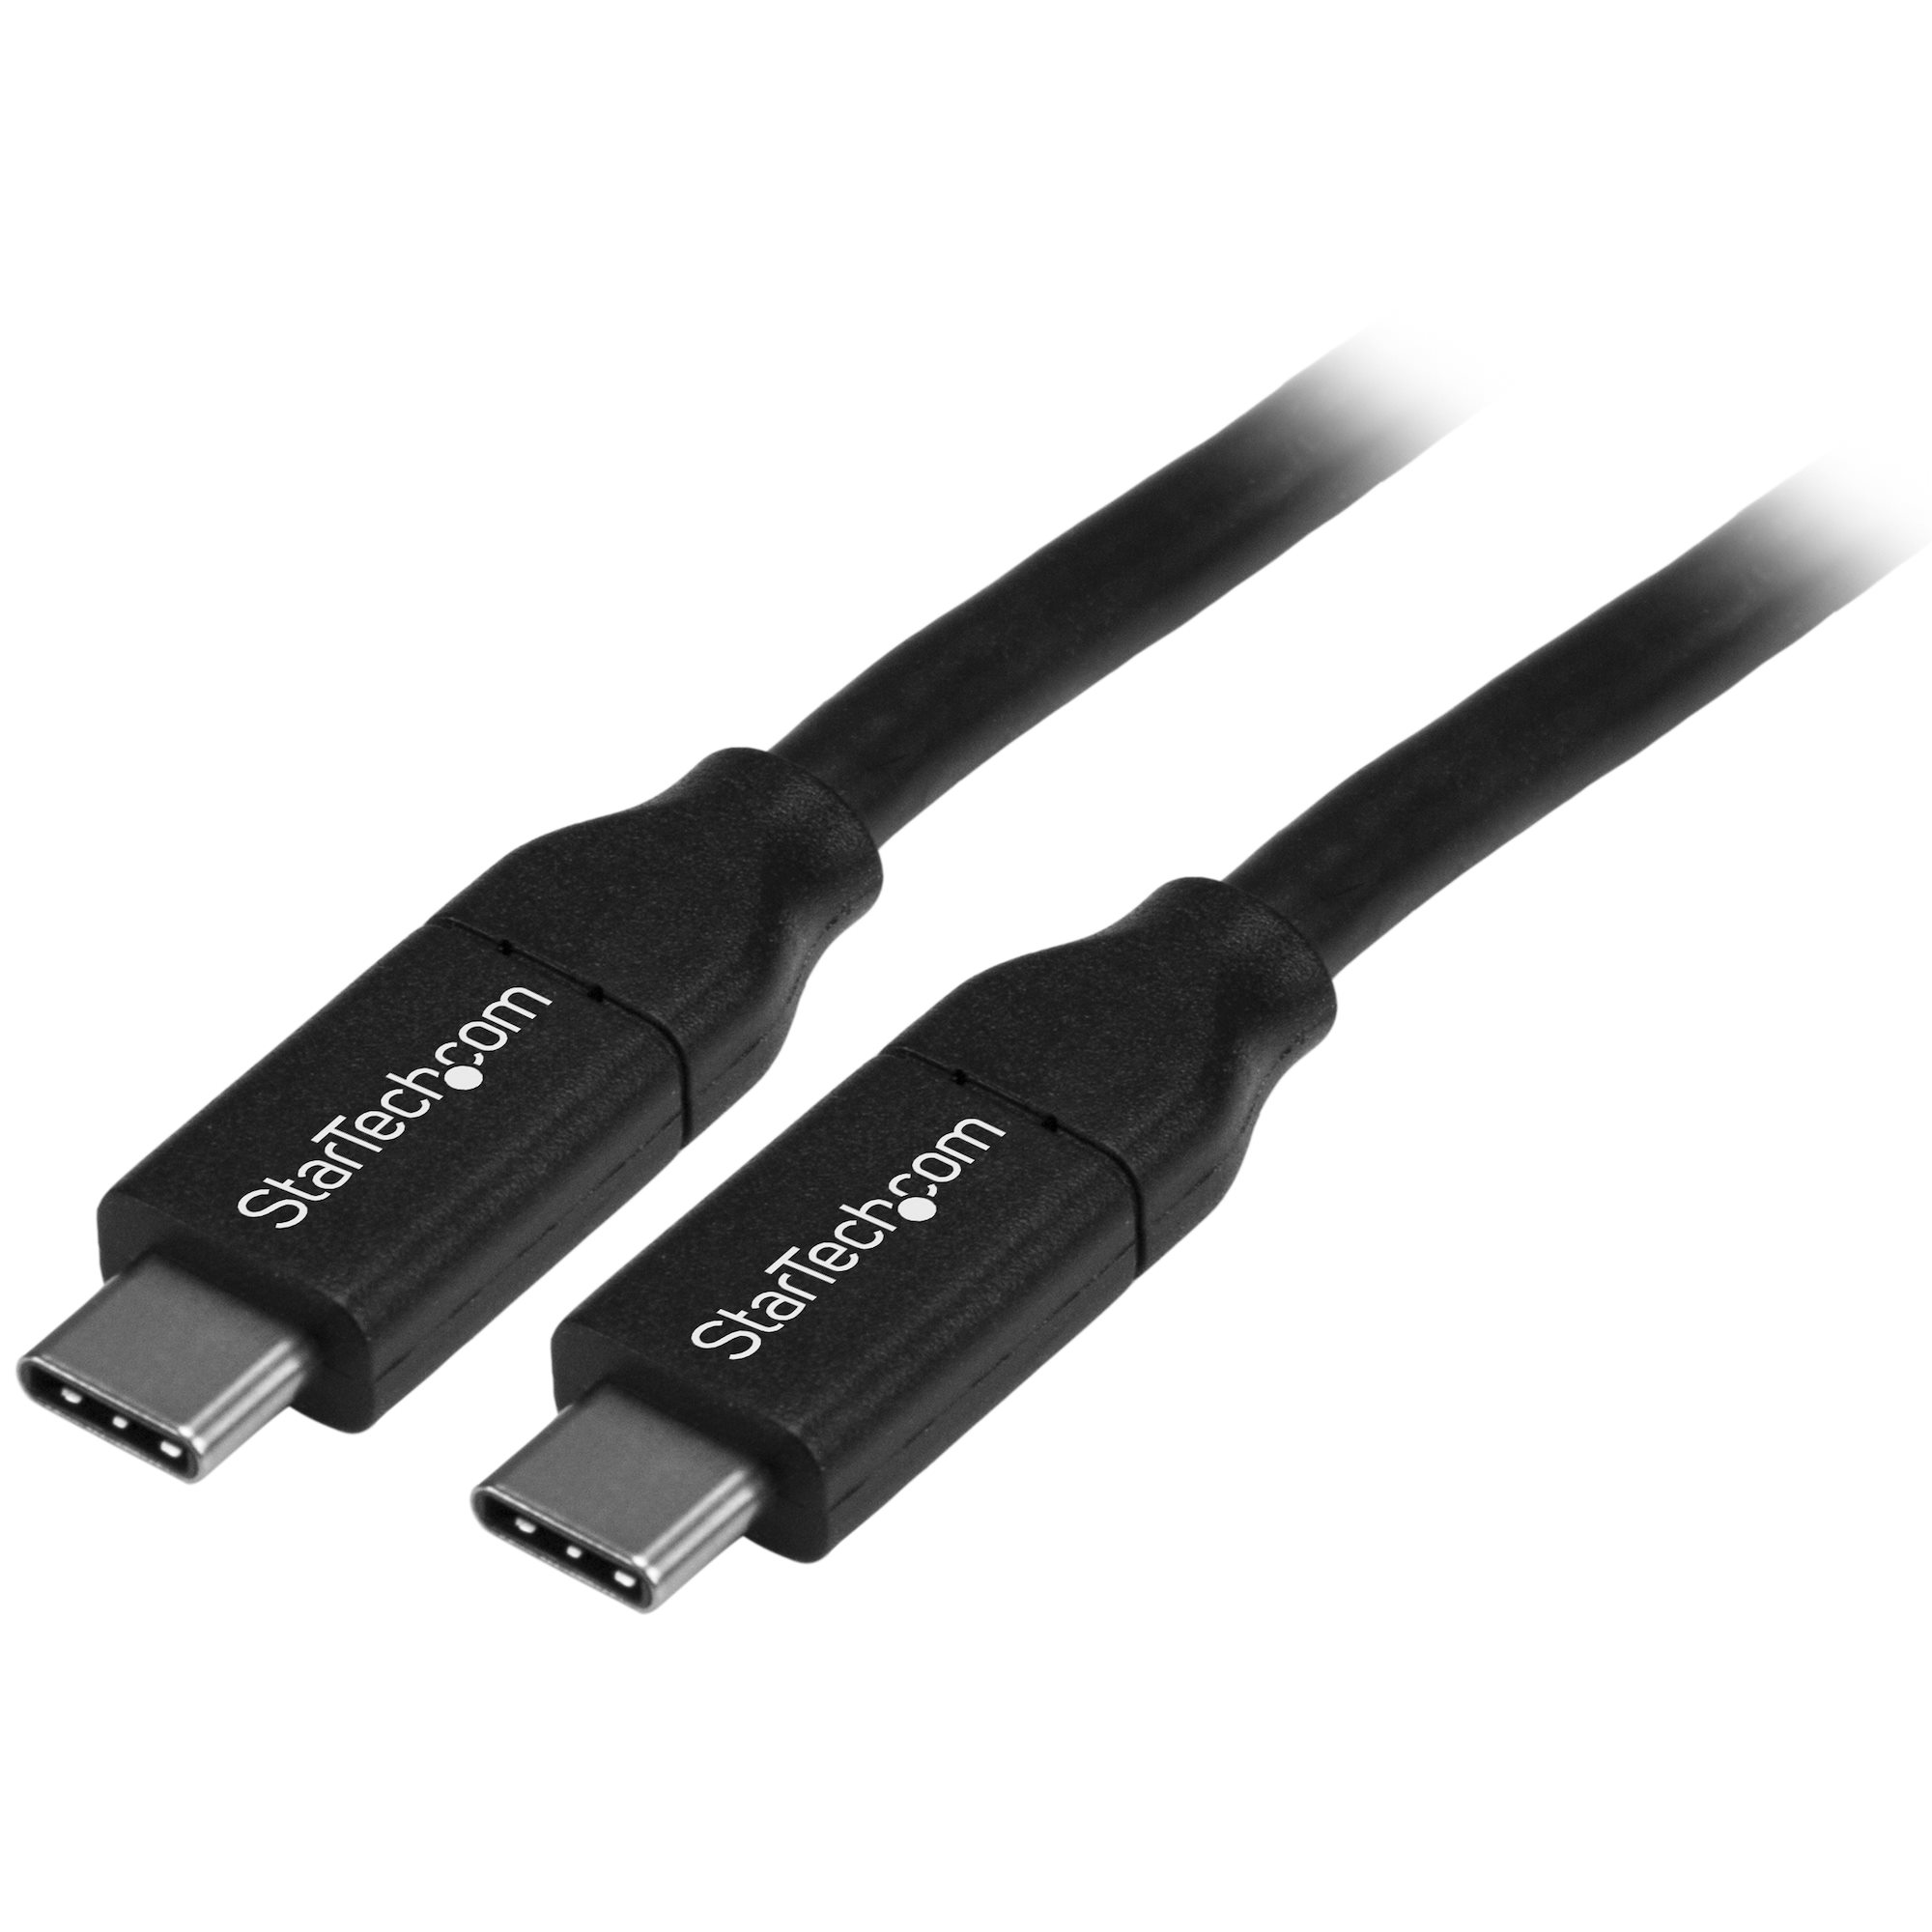 bitter Rarely Typical Cable - USBC w/ PD (5A) - USB 2.0 - 4m - USB-C Cables | StarTech.com